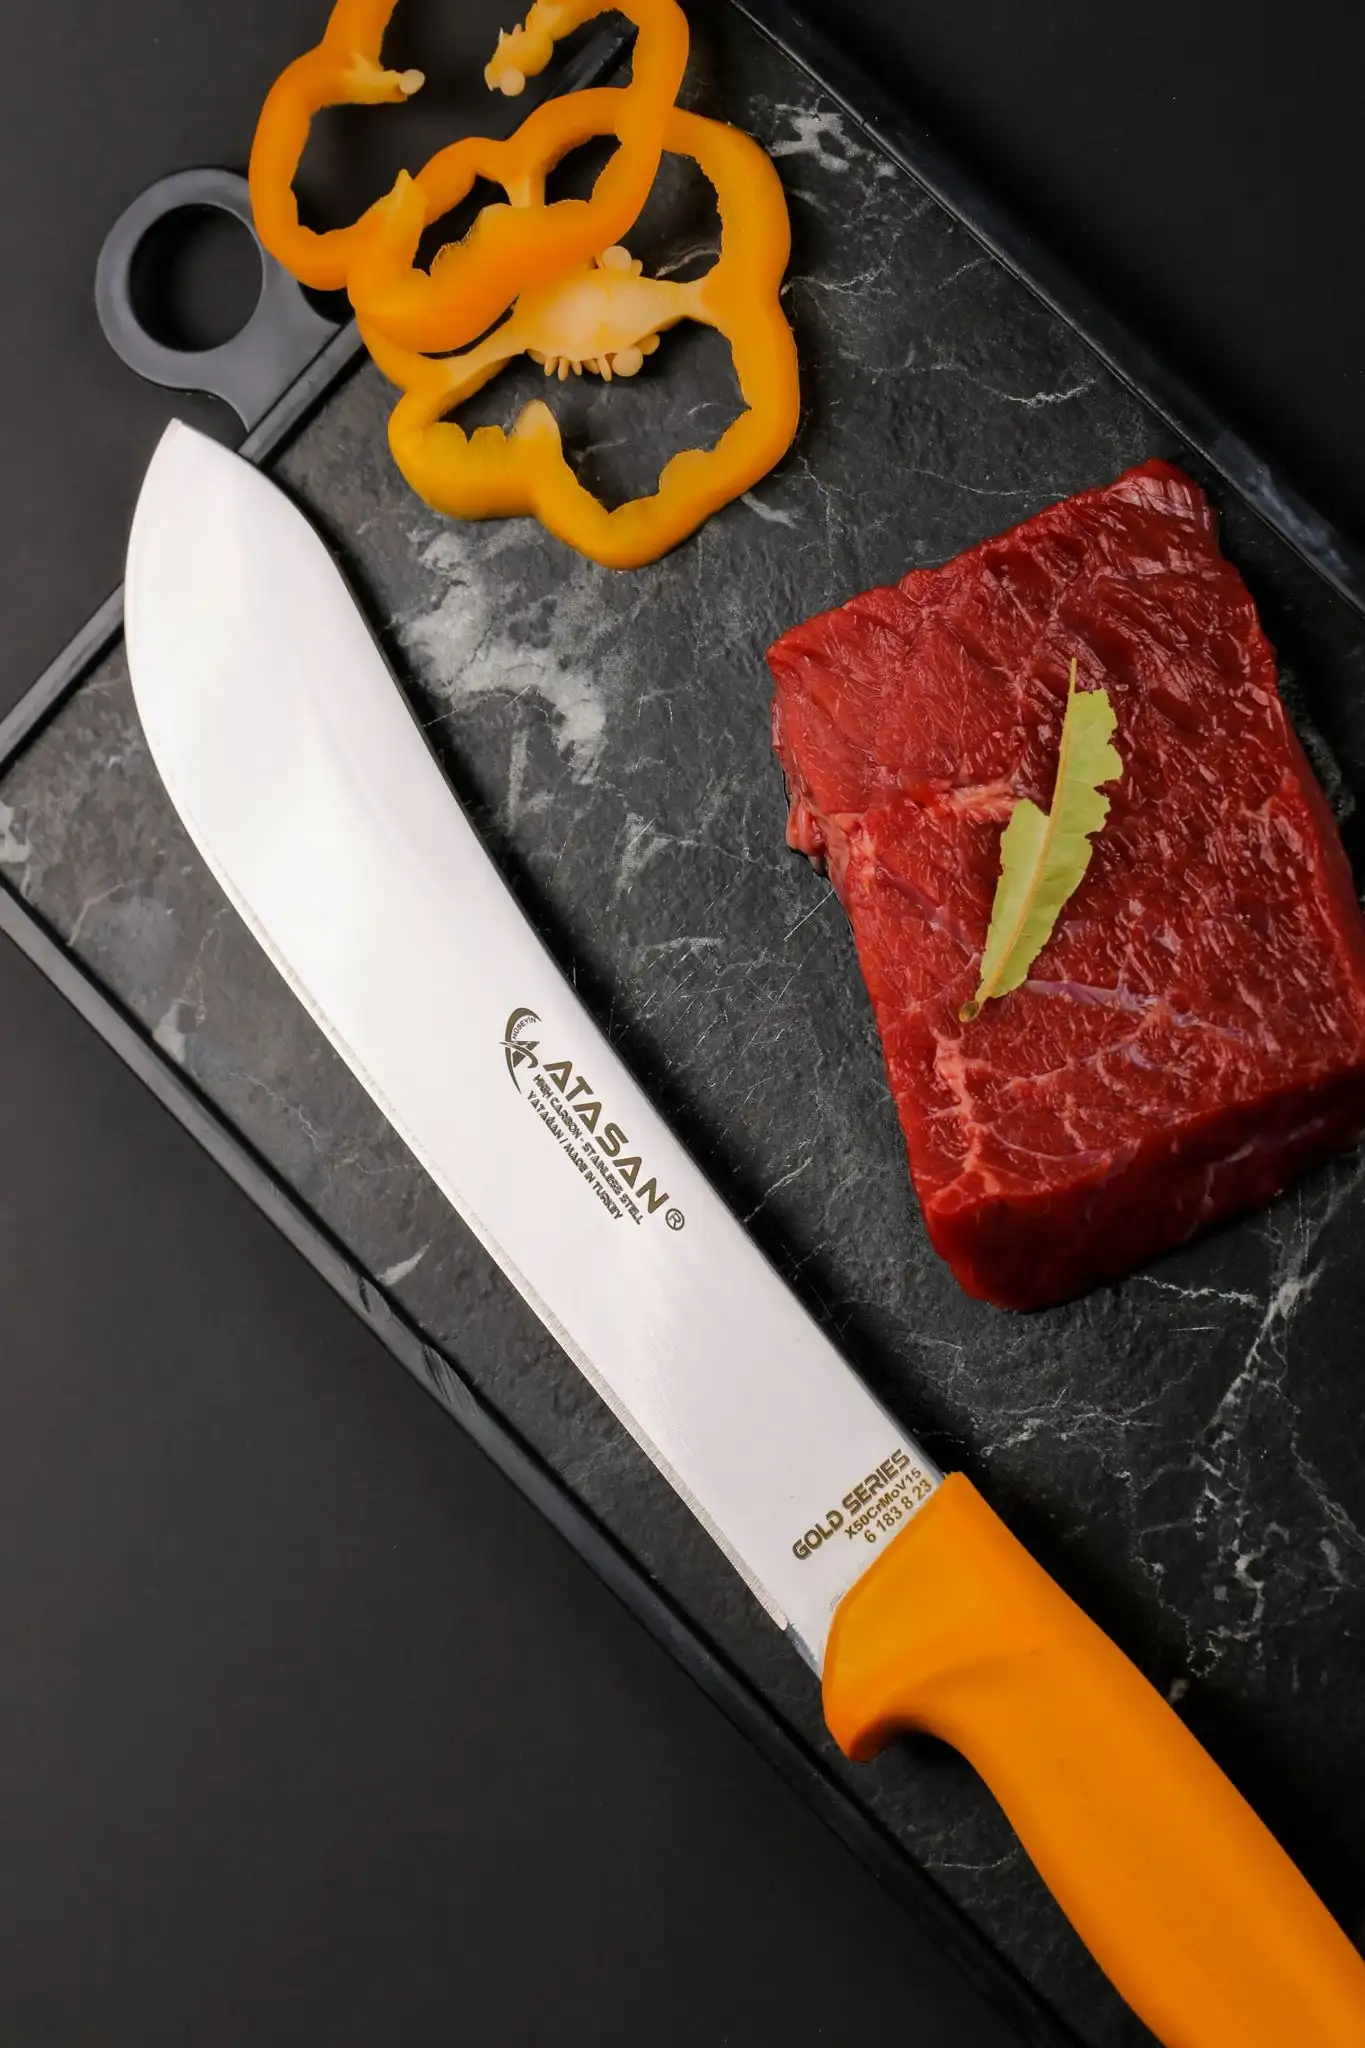 

ATASAN Meat Steak Chopper Knife Curved Chef Knives Handmade High Quality Professional Stainless Steel Nusret Saltbae